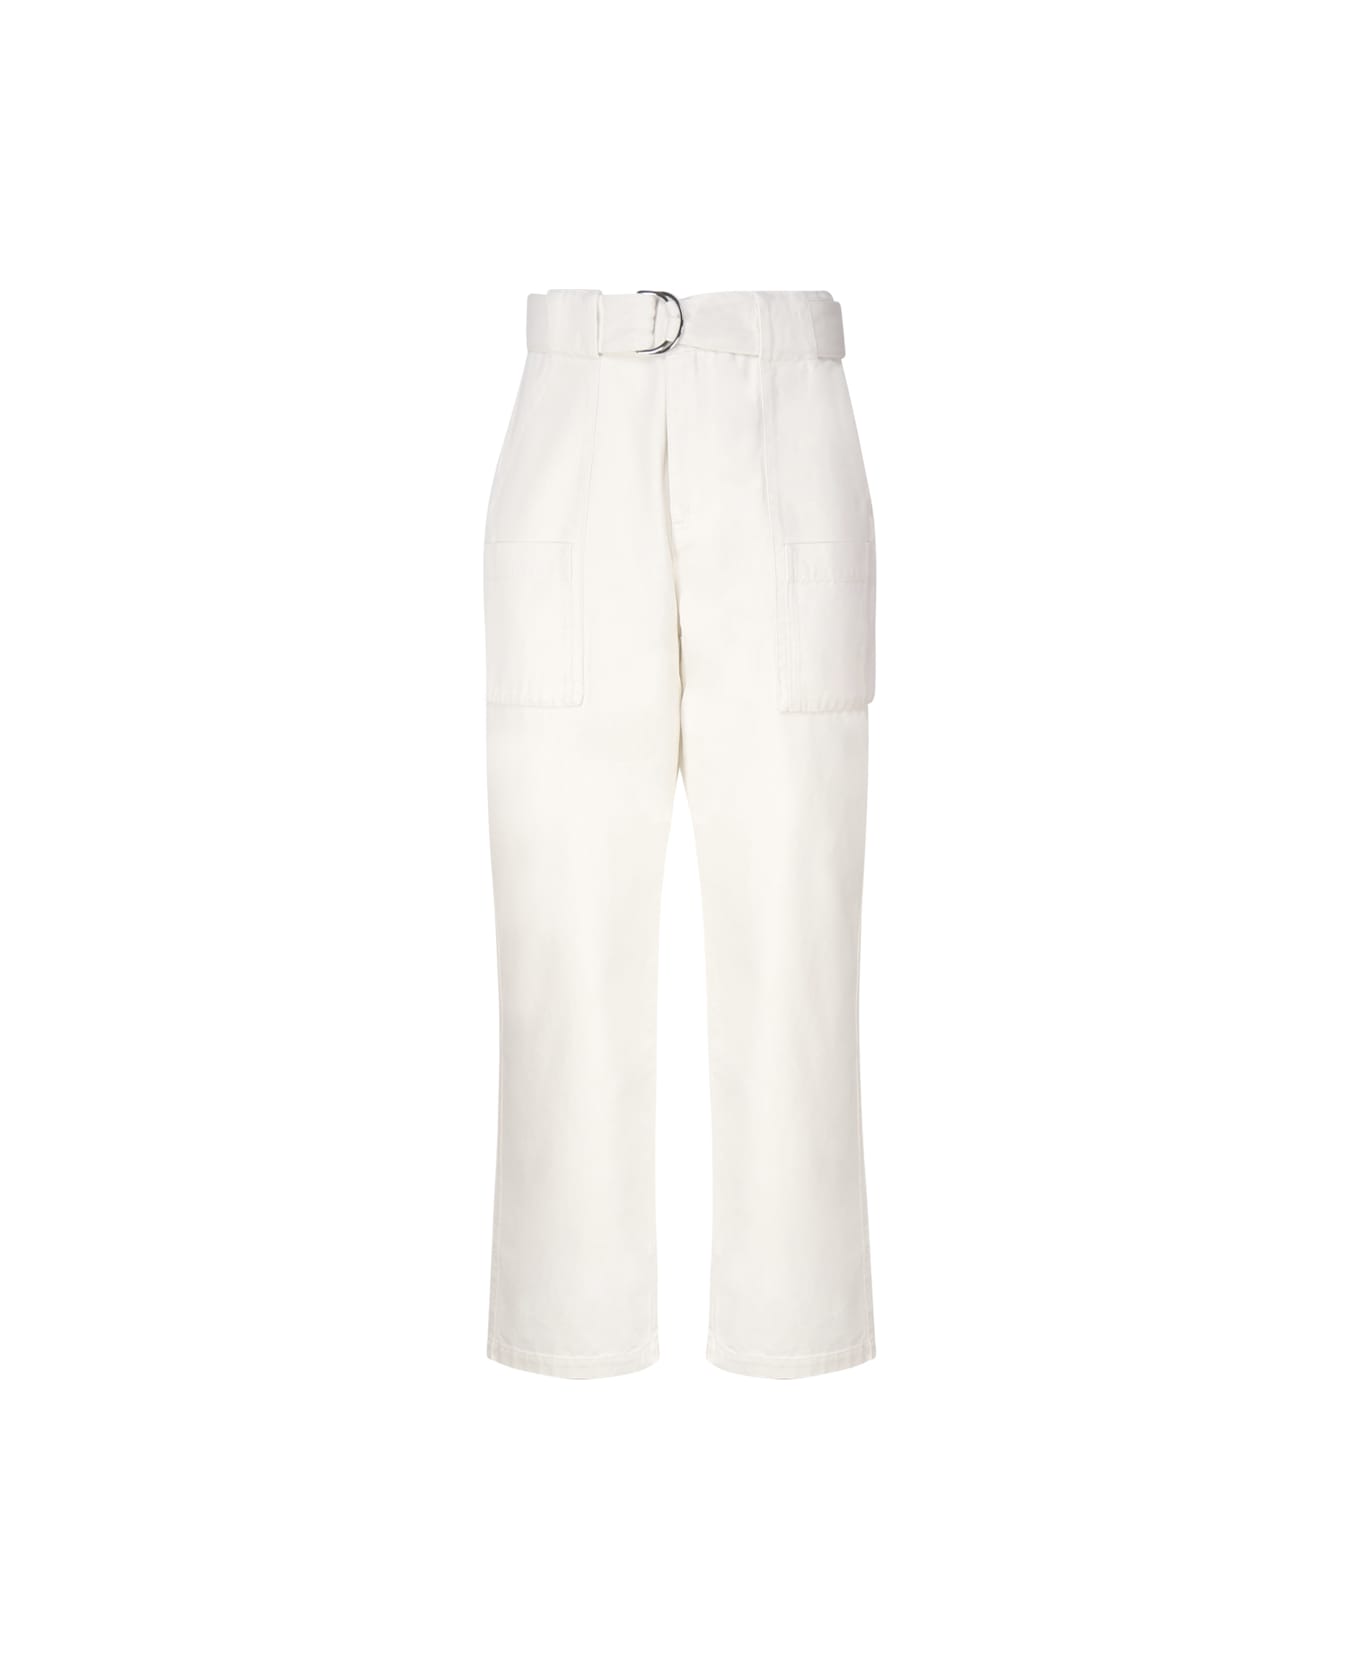 J.W. Anderson Cotton Pants With Belt - Beige ボトムス